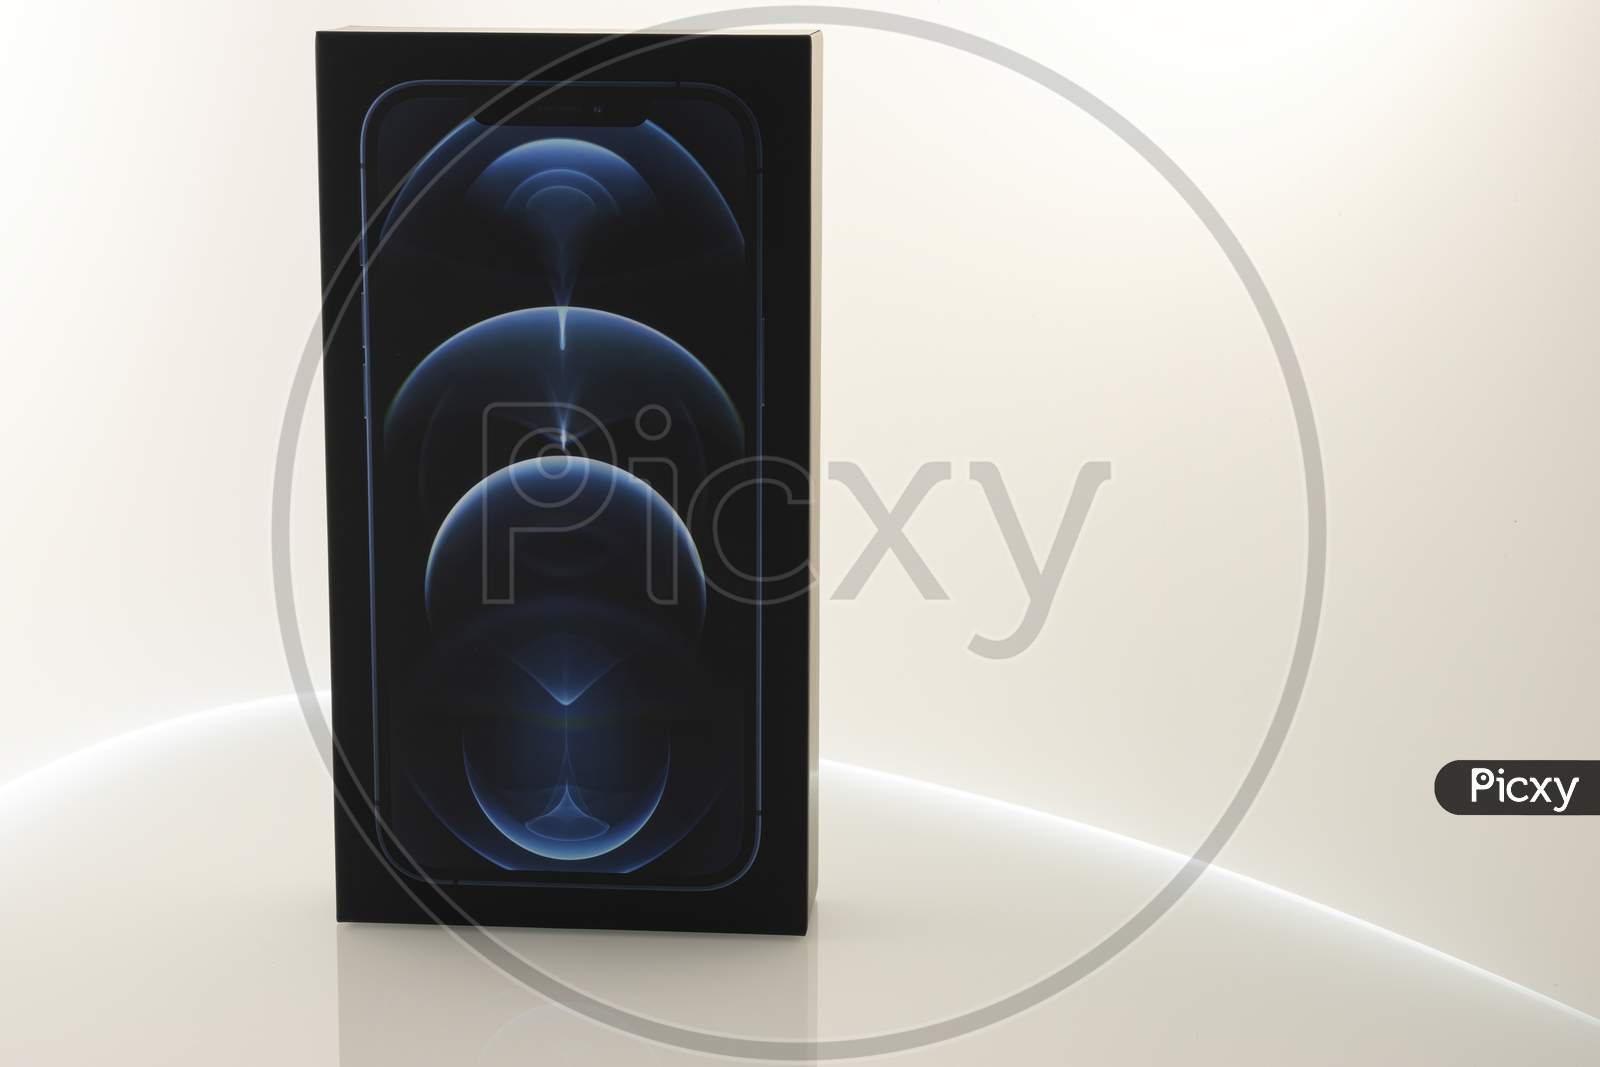 Frankfurt, Germany - November 13th 2020: A german photographer bought the new iPhone 12 Pro Max in the color Pacific Blue, taking pictures of the unboxing after it was delivered.